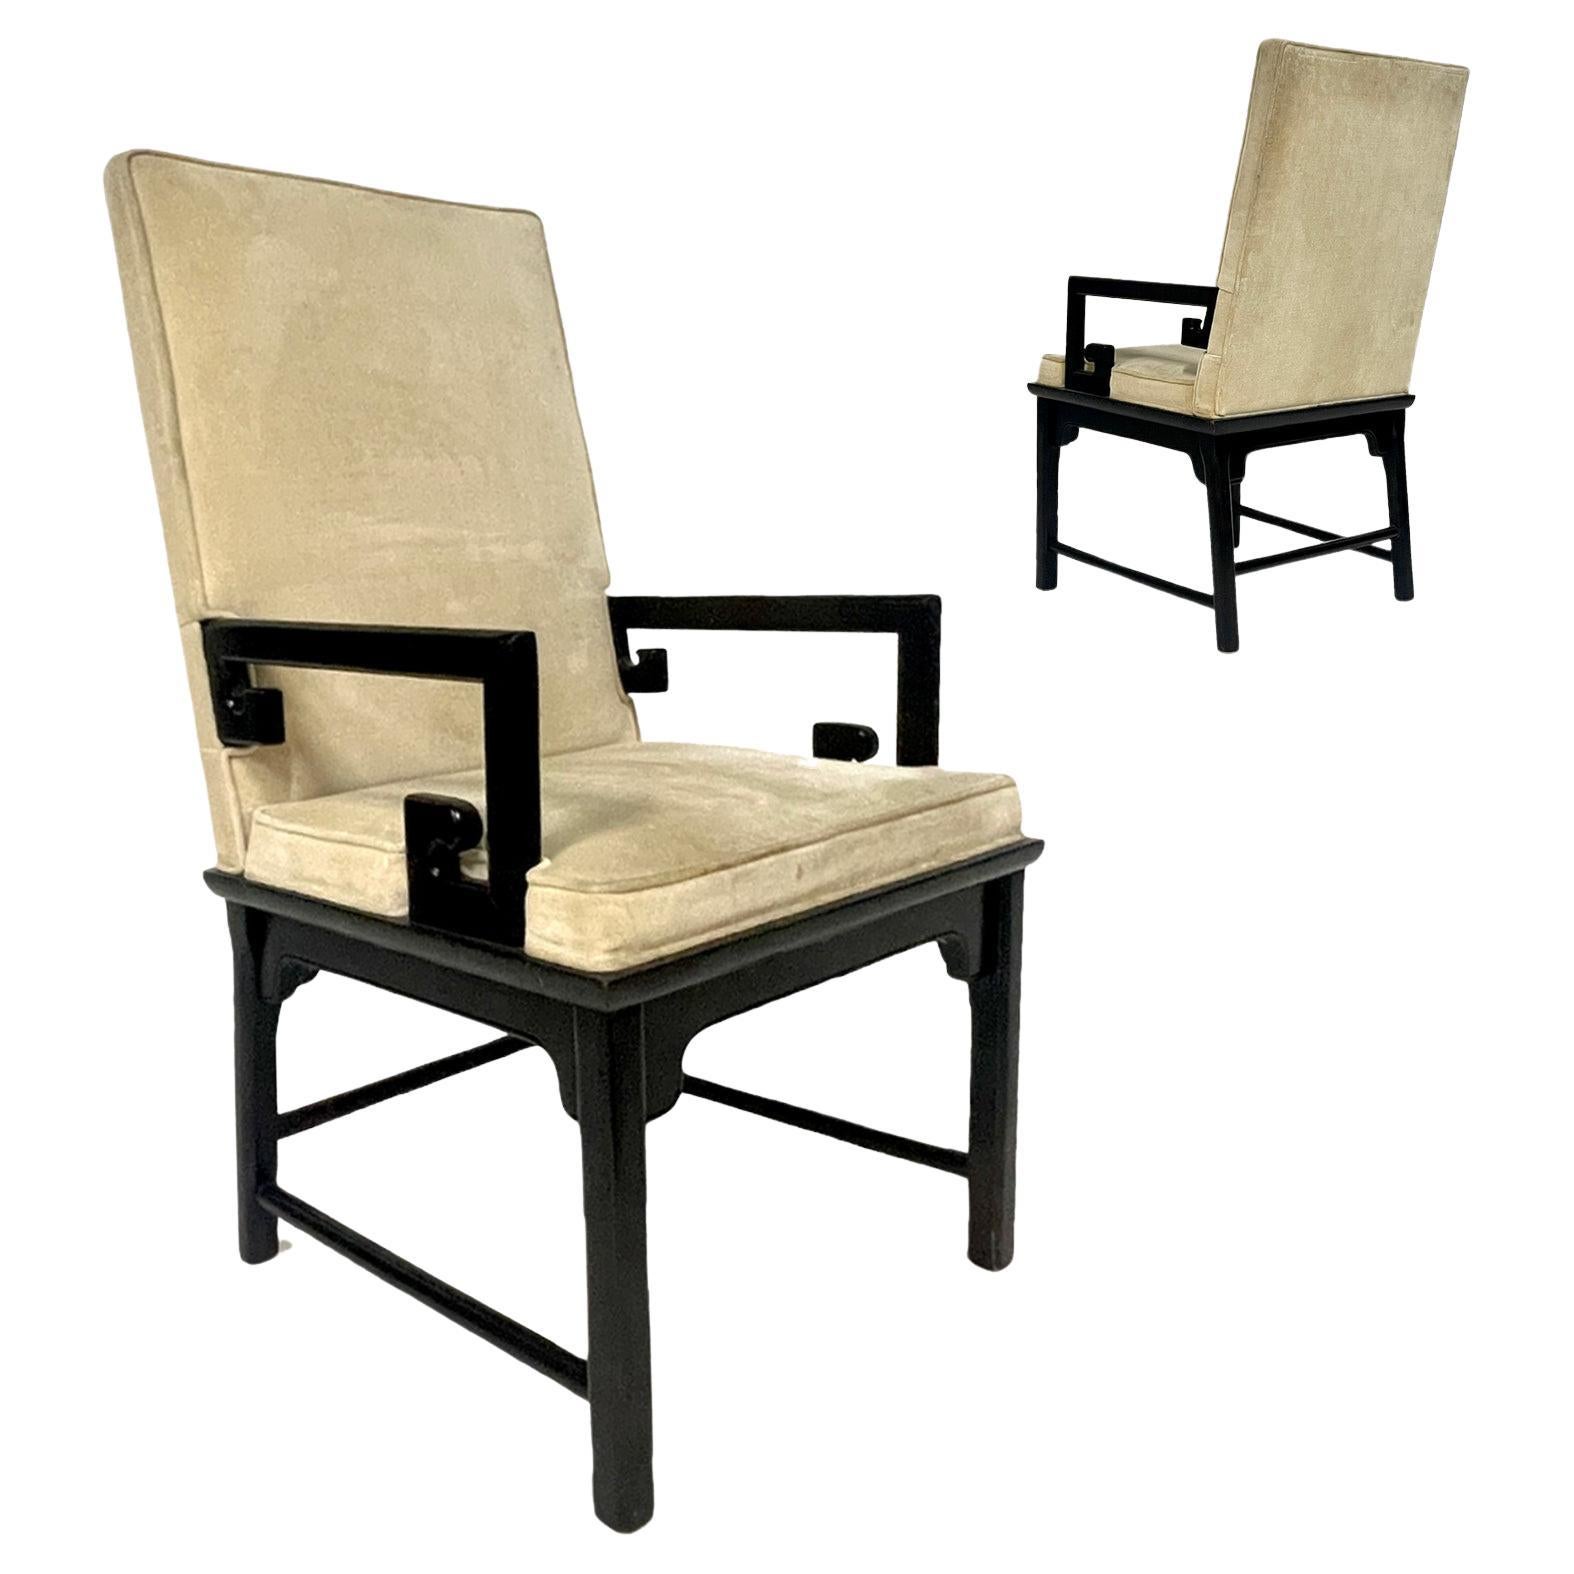 Stunning pair of midcentury Chinoiserie styled chairs in the manner of Michael Taylor. These solid ebonized wood framed chairs w. a cream colored velvet upholstery stand regally. Can be used as armchairs of dining chairs. The upholstery has signs of